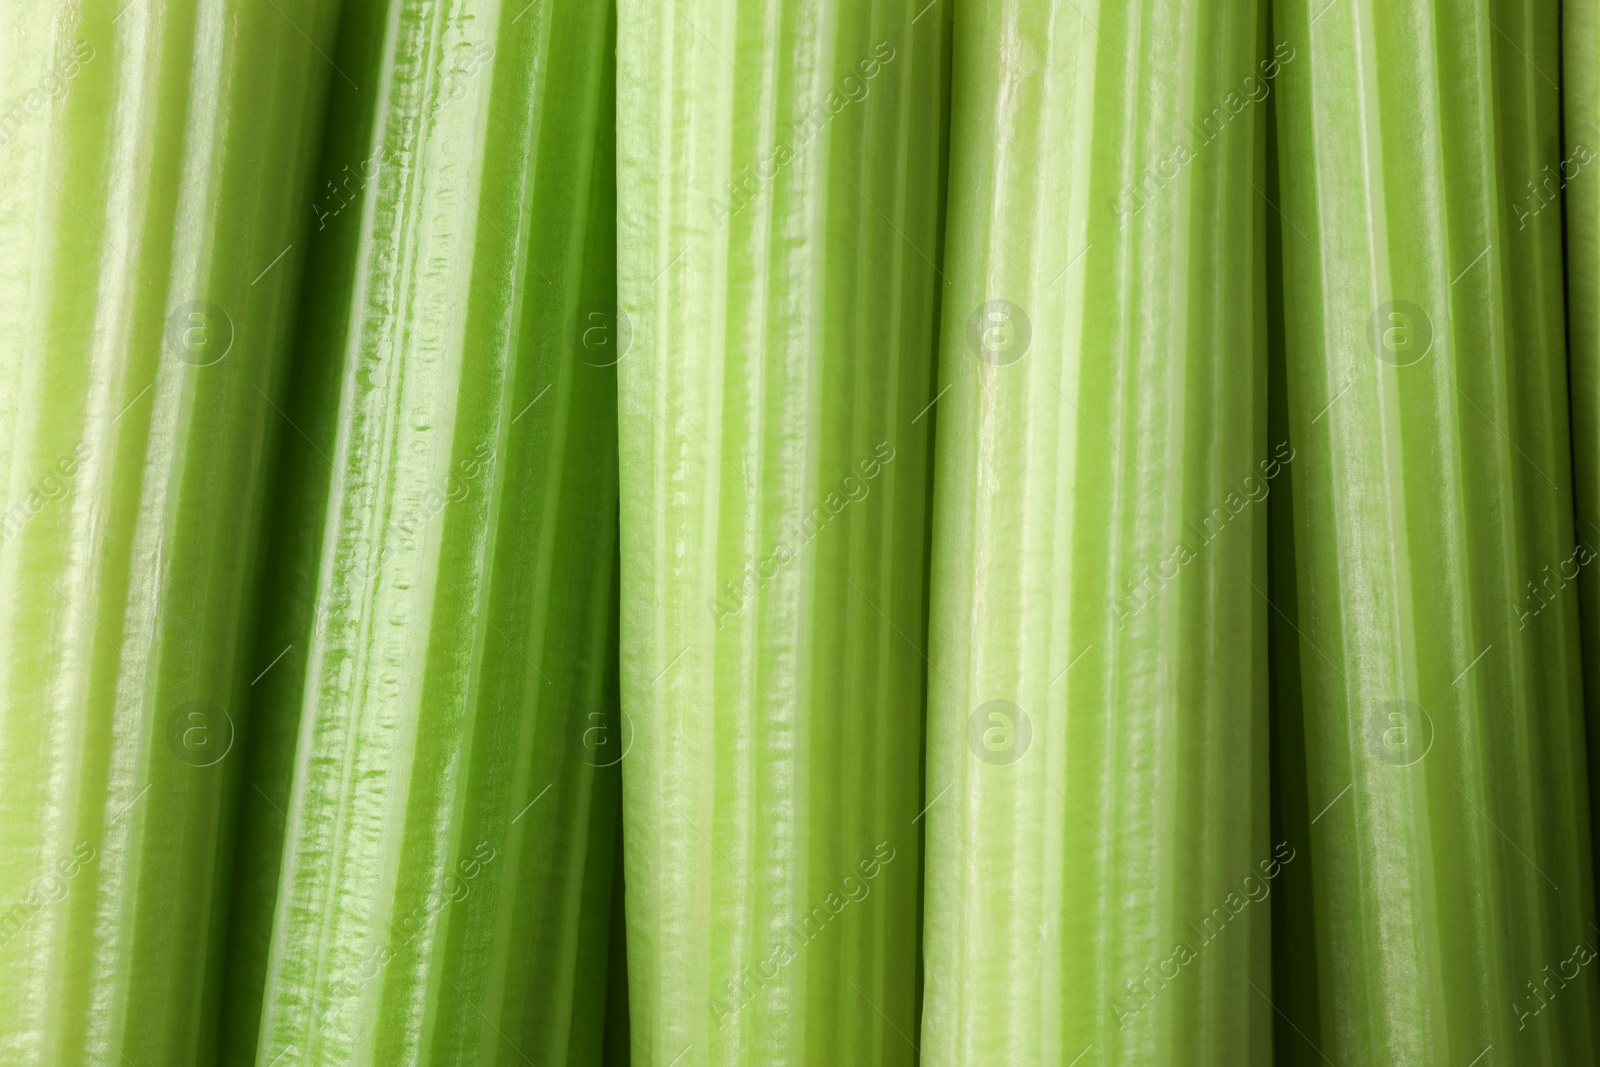 Photo of Fresh green celery as background, top view